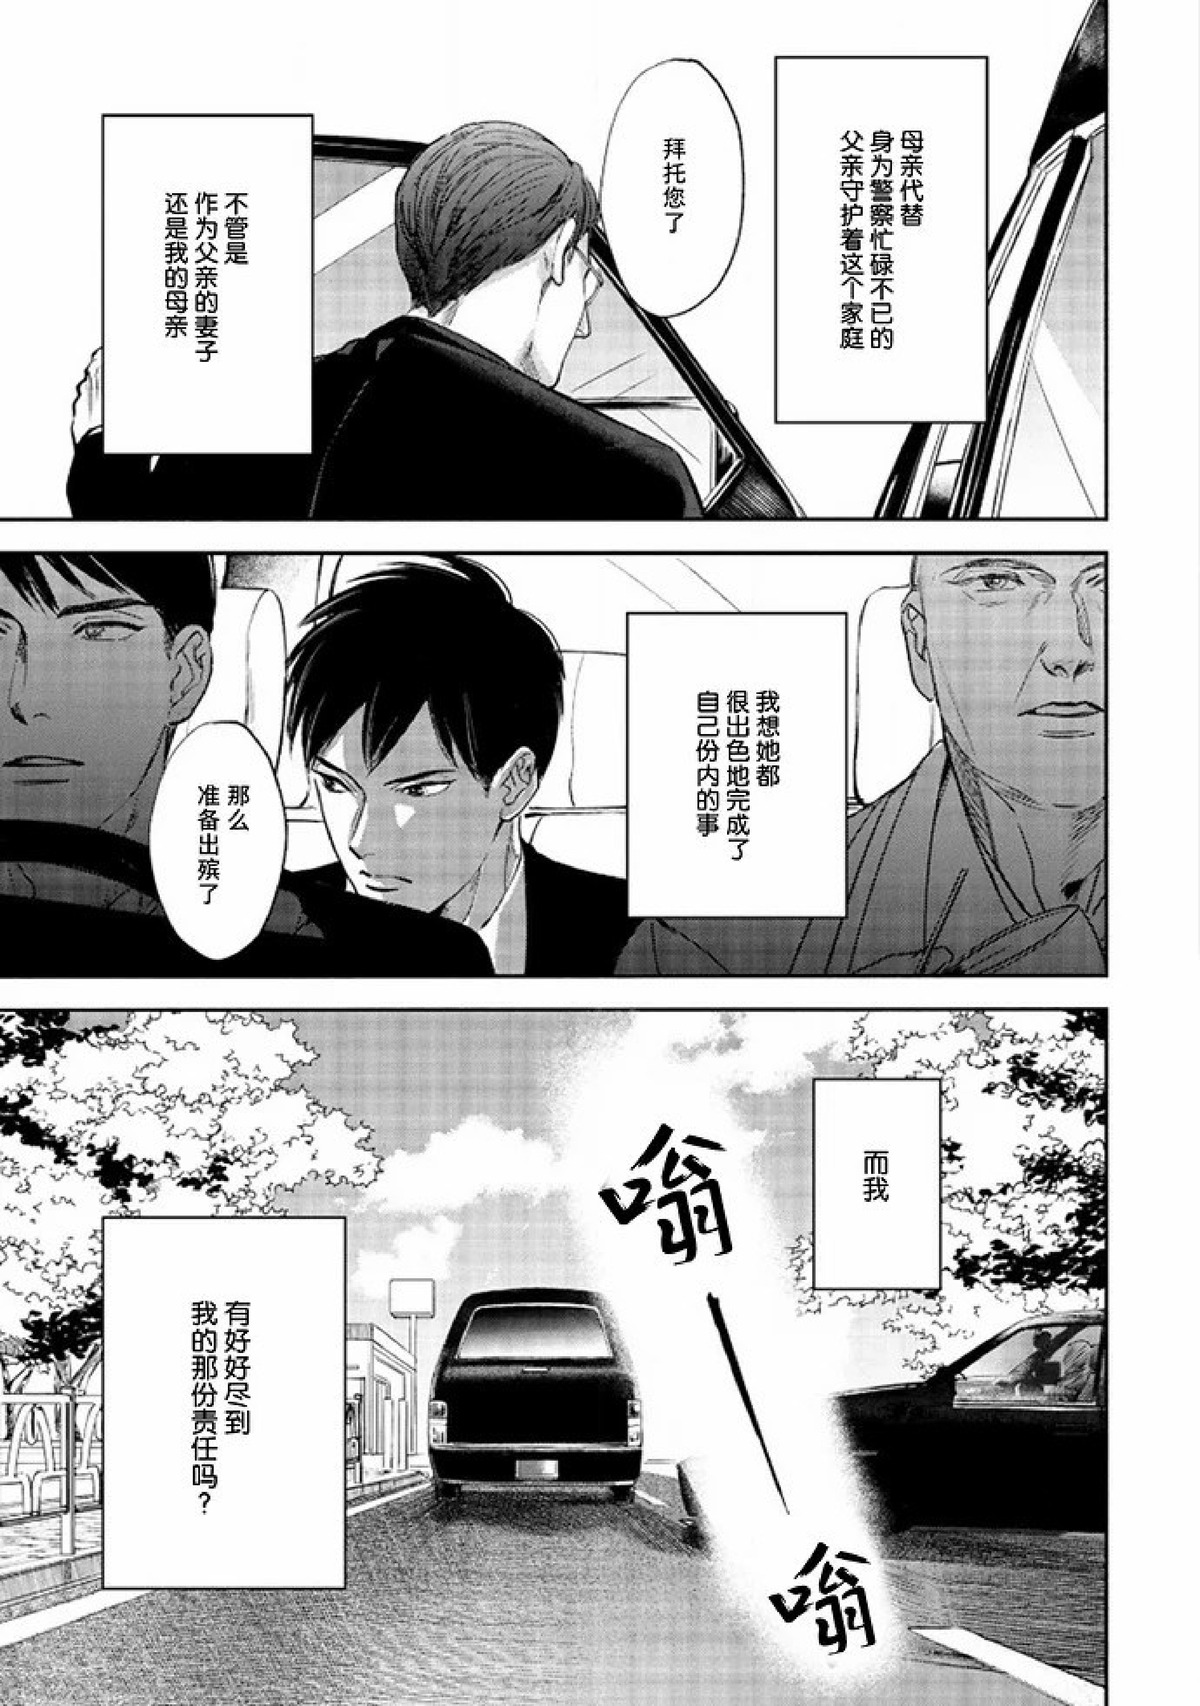 【Two sides of the same coin[耽美]】漫画-（上卷01-02）章节漫画下拉式图片-15.jpg